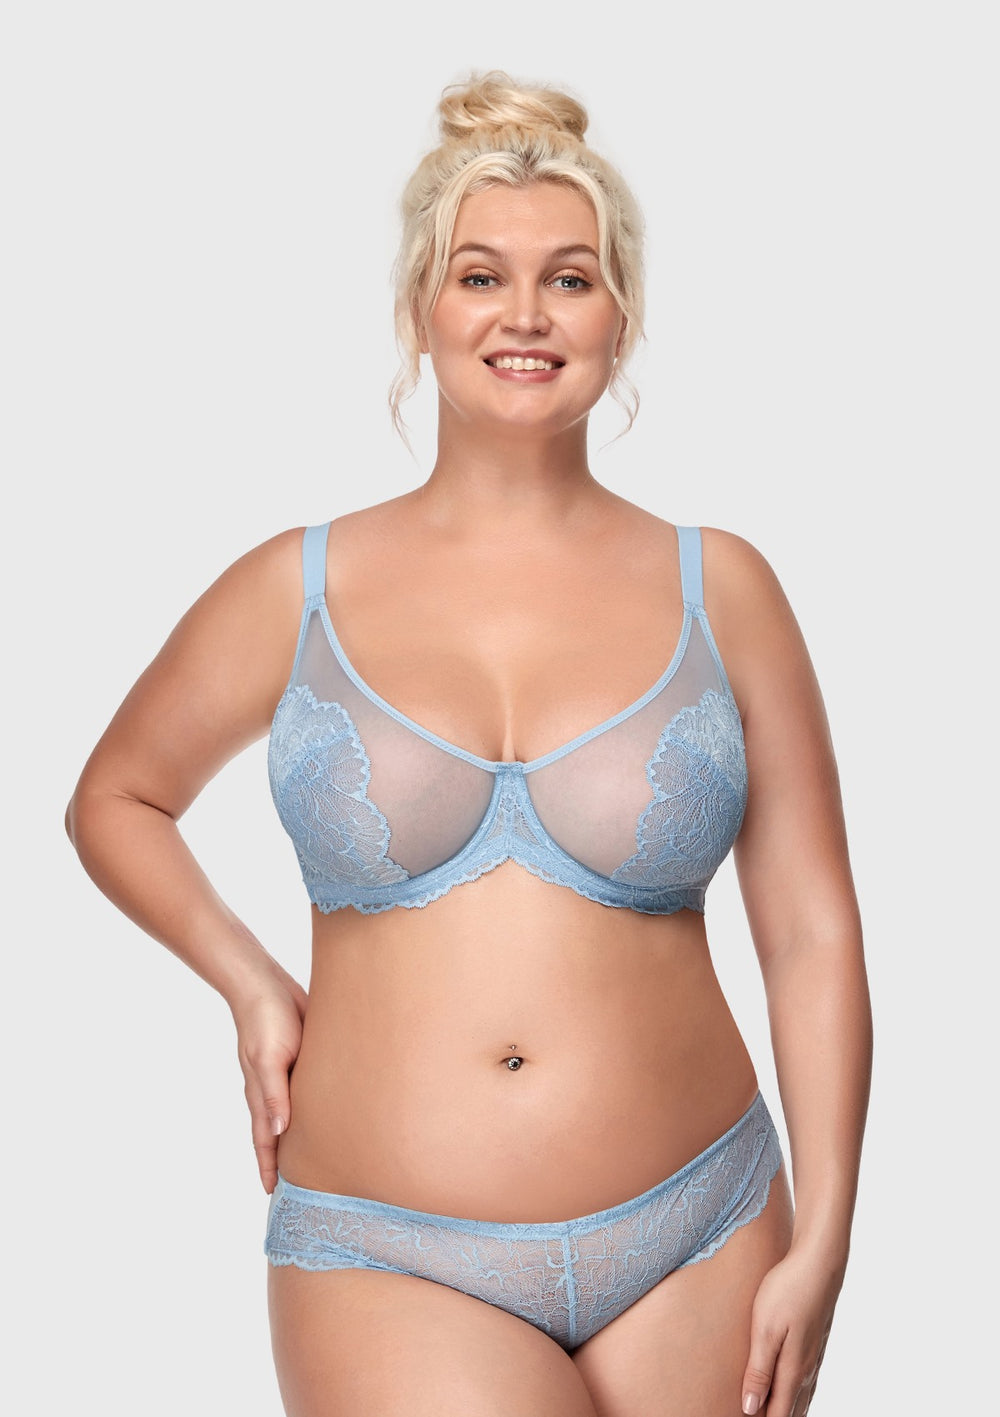 HSIA Blossom Transparent Lace Bra: Plus Size Wired Back Smoothing Bra